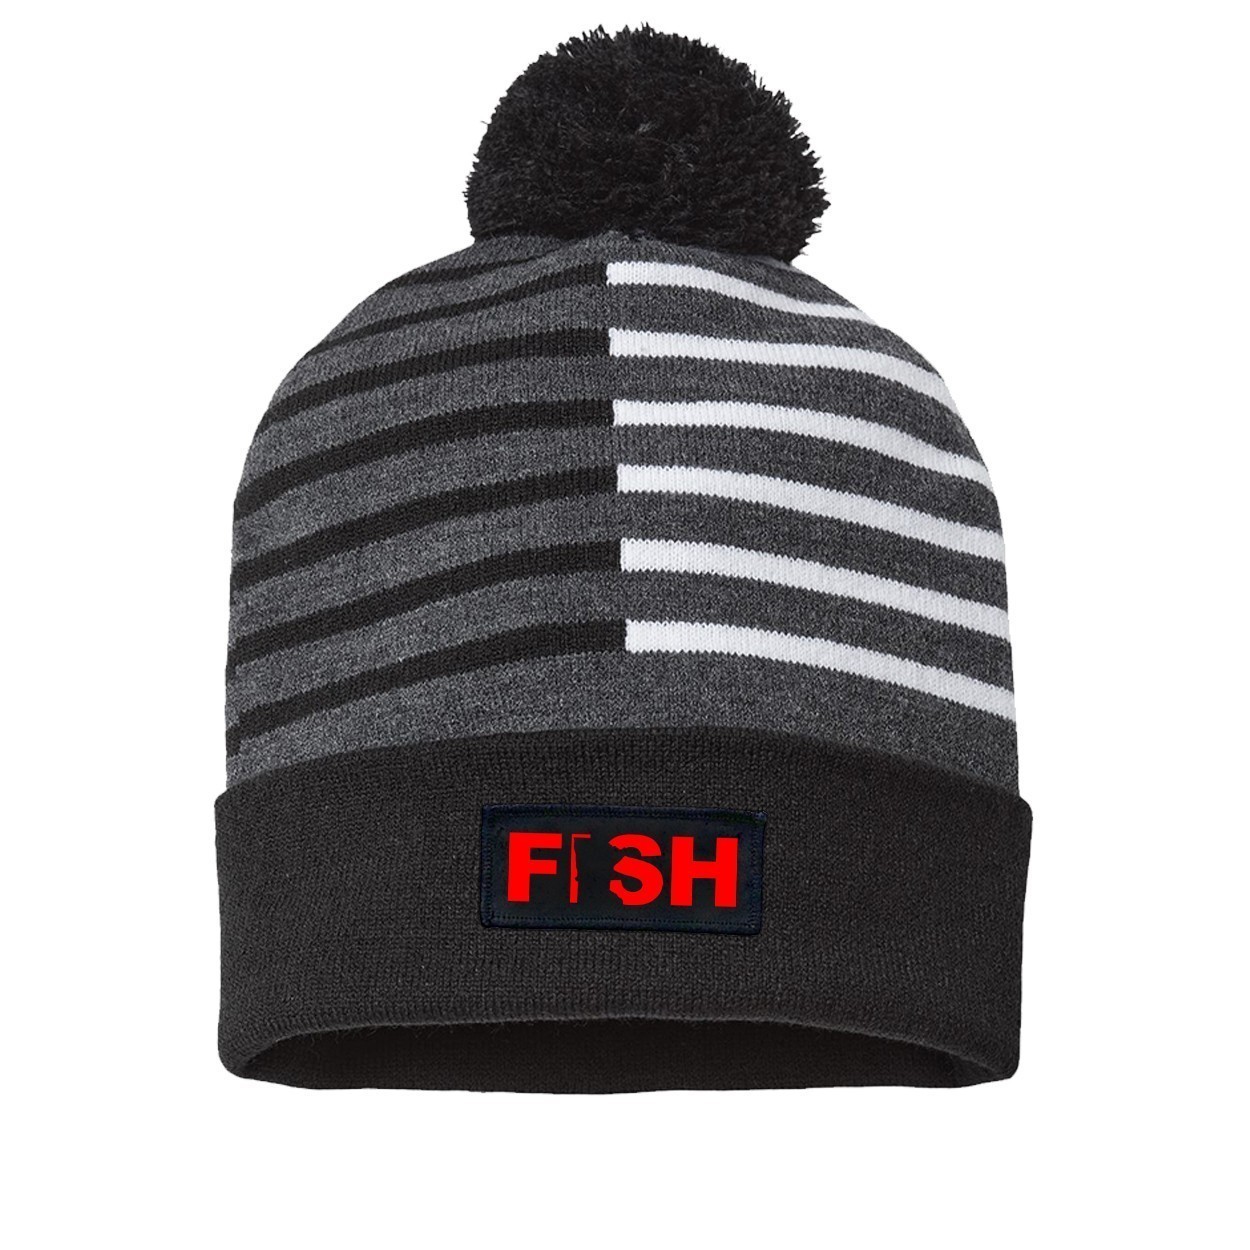 Fish Minnesota Night Out Woven Patch Roll Up Pom Knit Beanie Half Color Black/White (Red Logo)